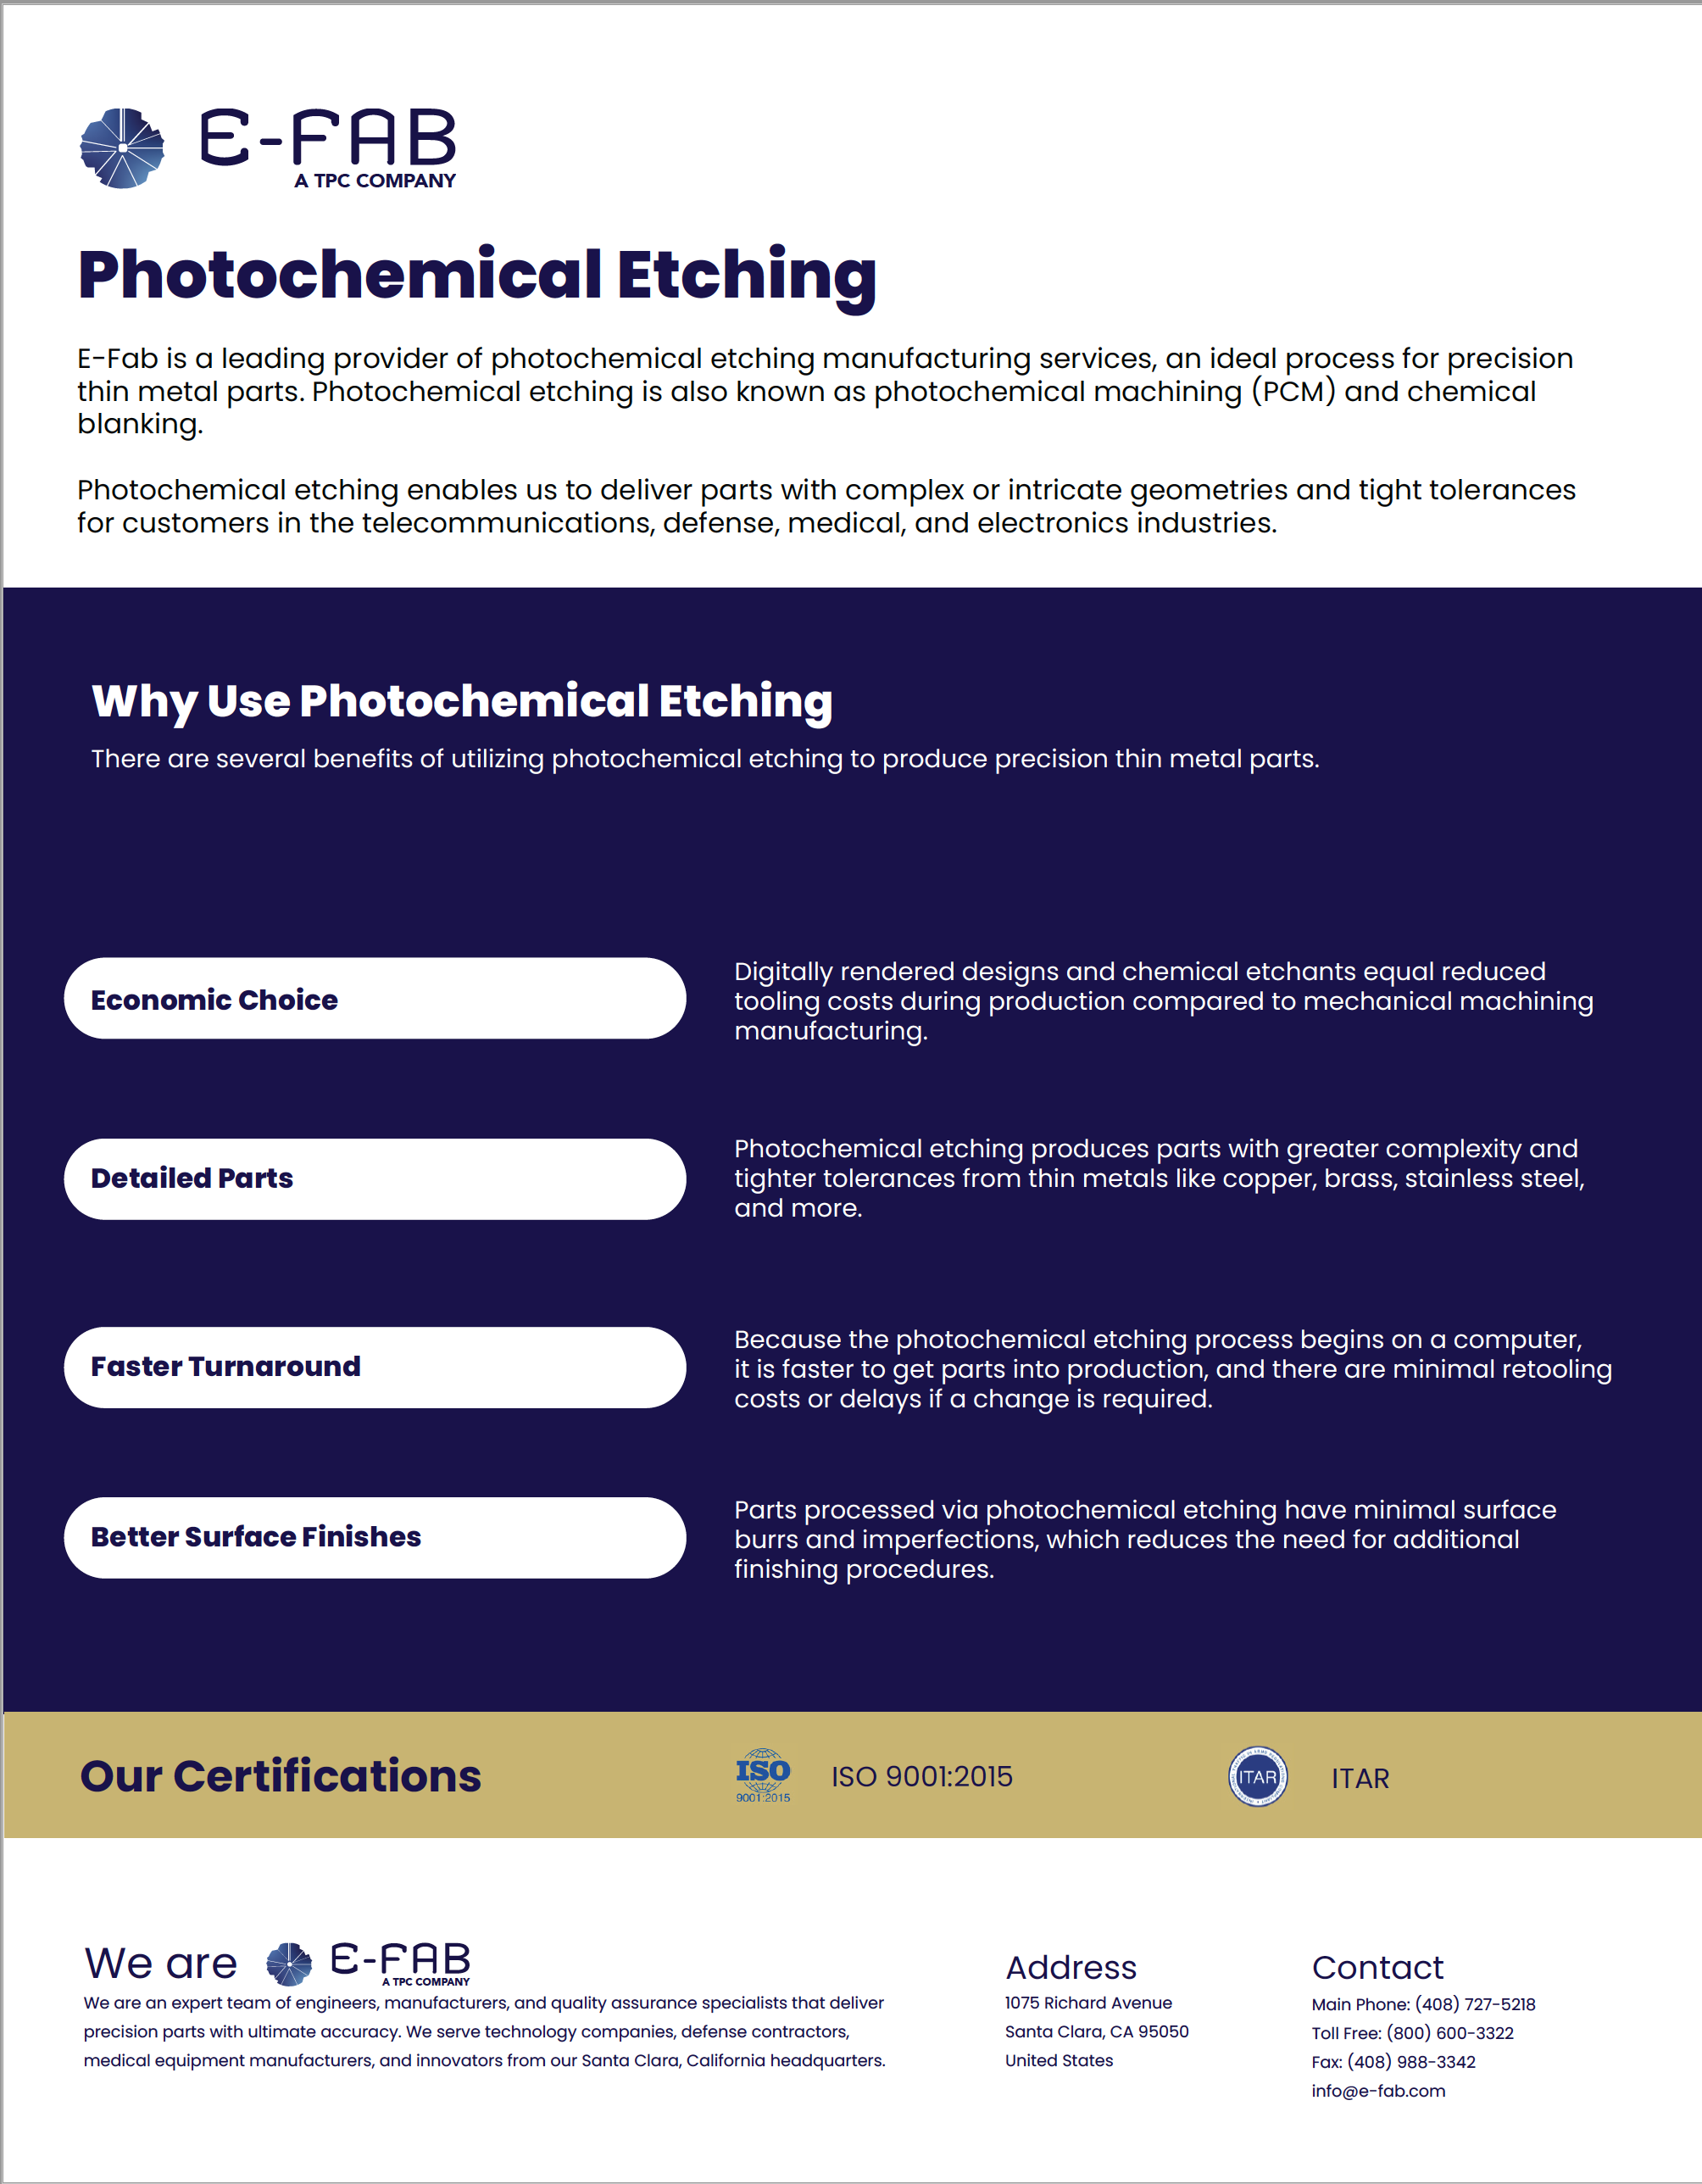 E-Fab Photochemical Etching Resource Paper